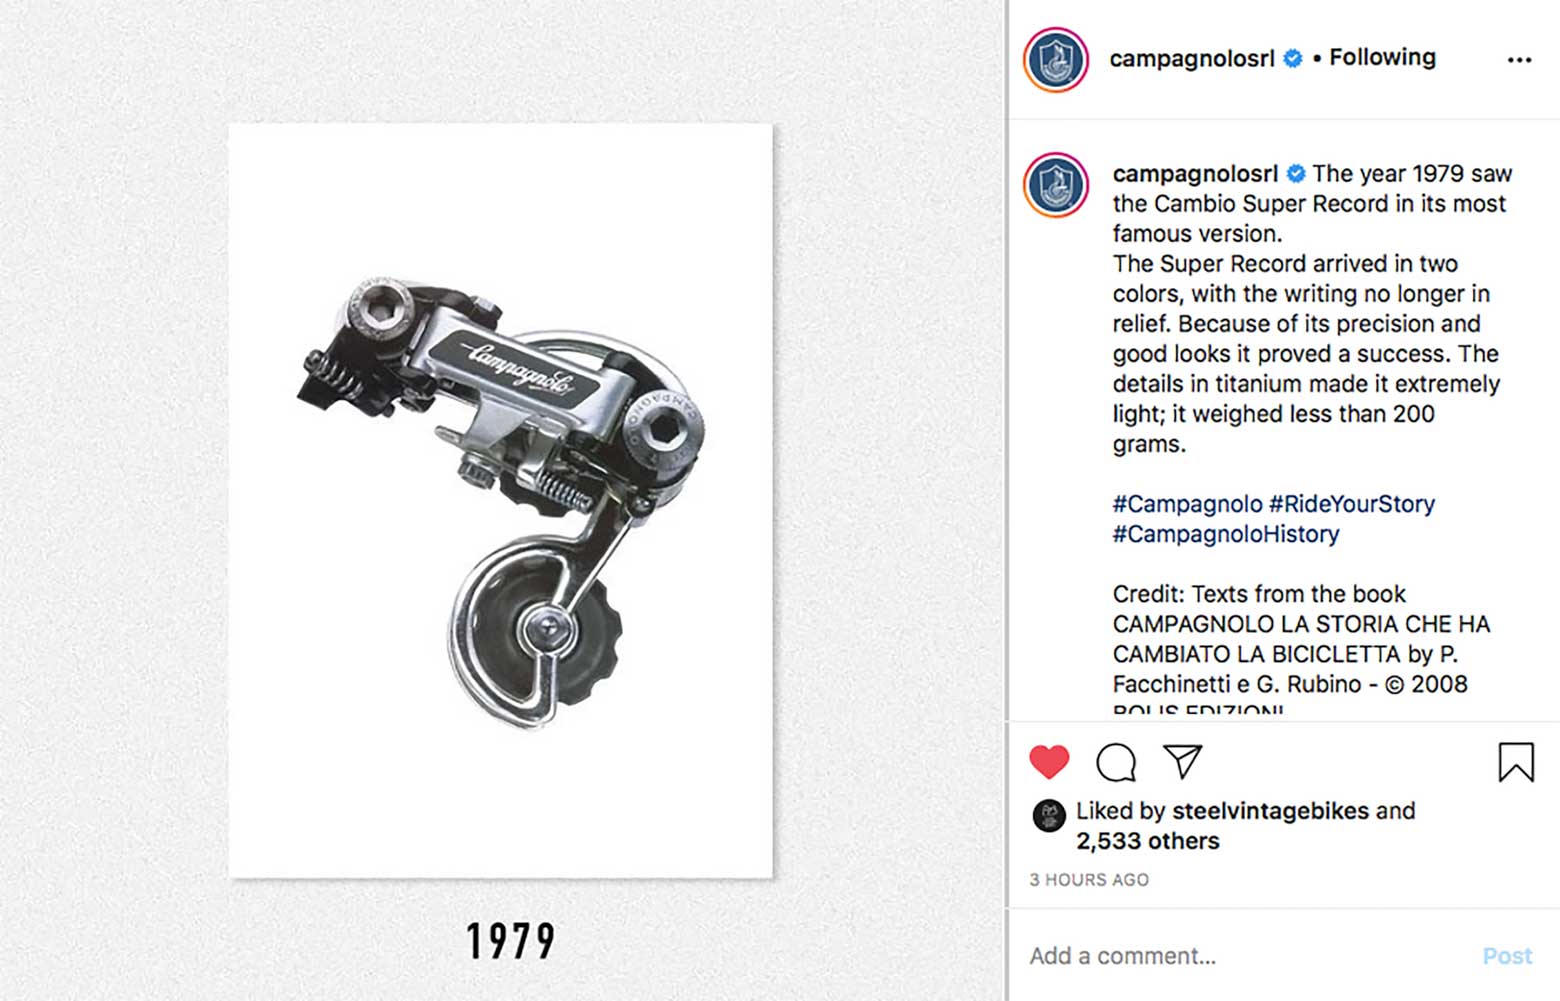 Campagnolo - Instagram history image 11 main image